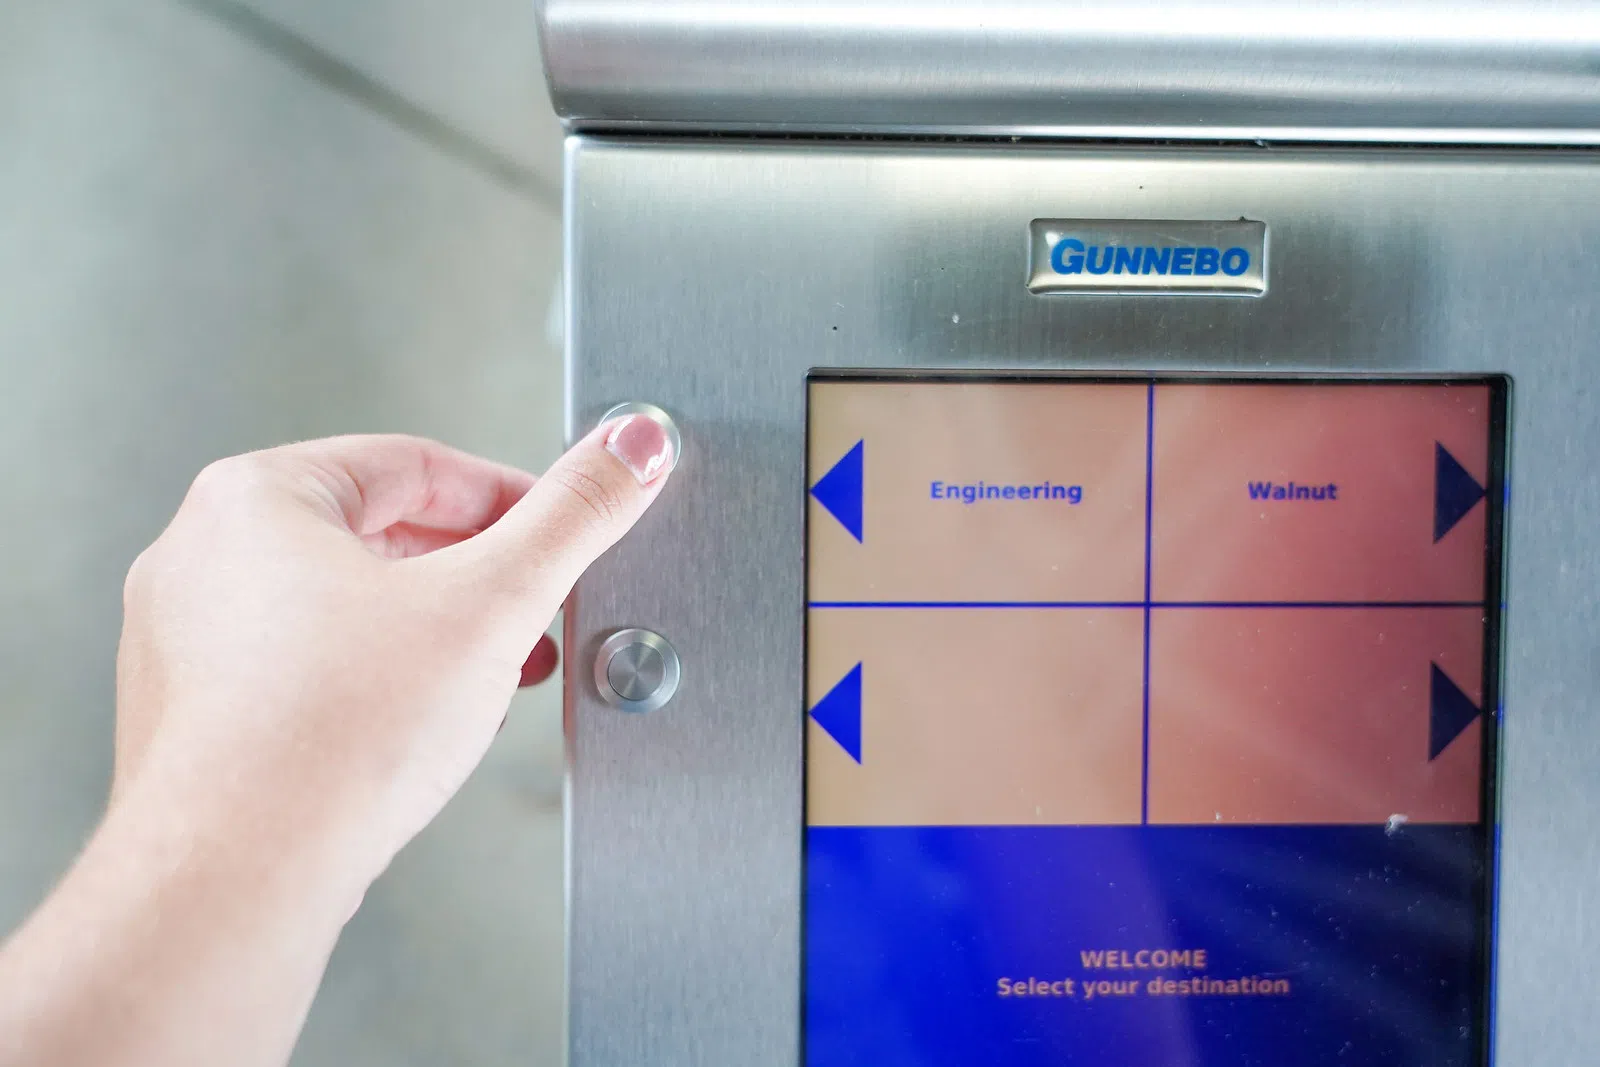 Image shows a student selecting their desired PRT station destination on the automated screen. 